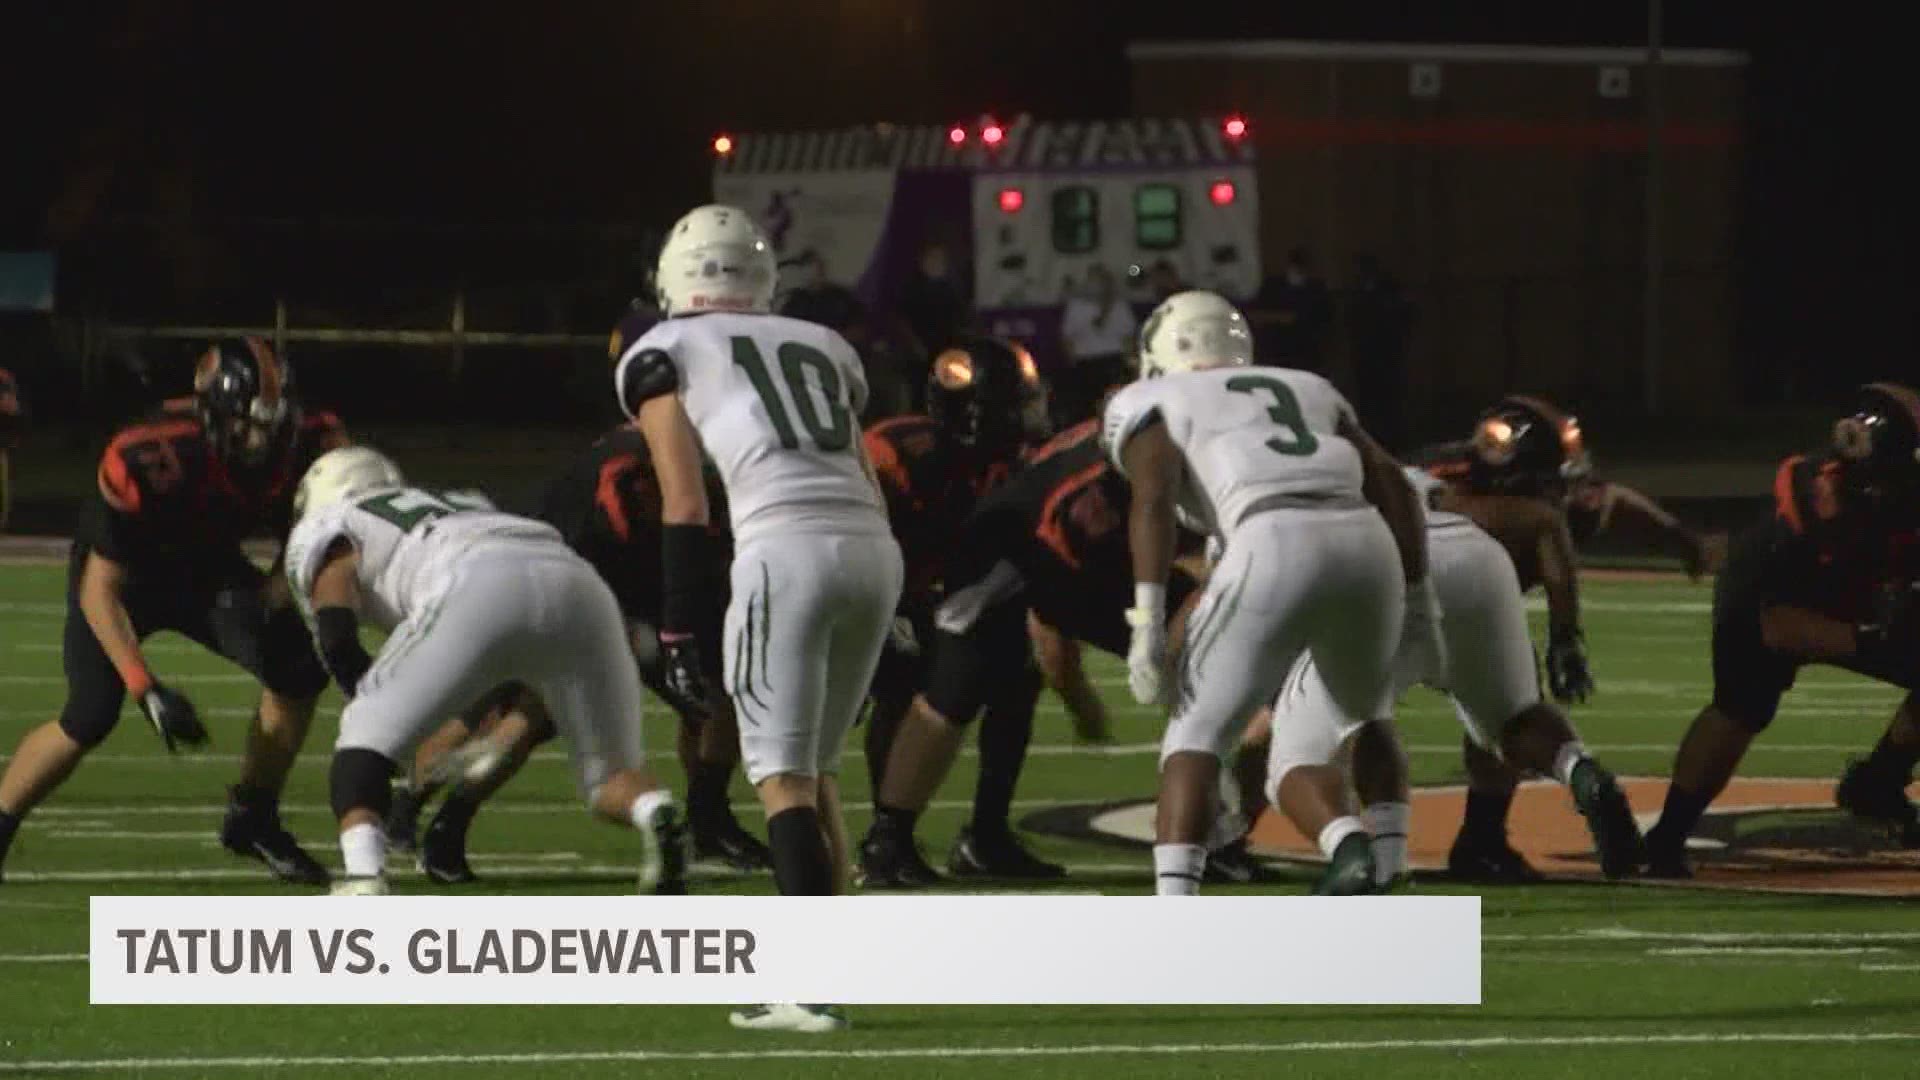 Gladewater defeated Tatum by a score of 42-21.